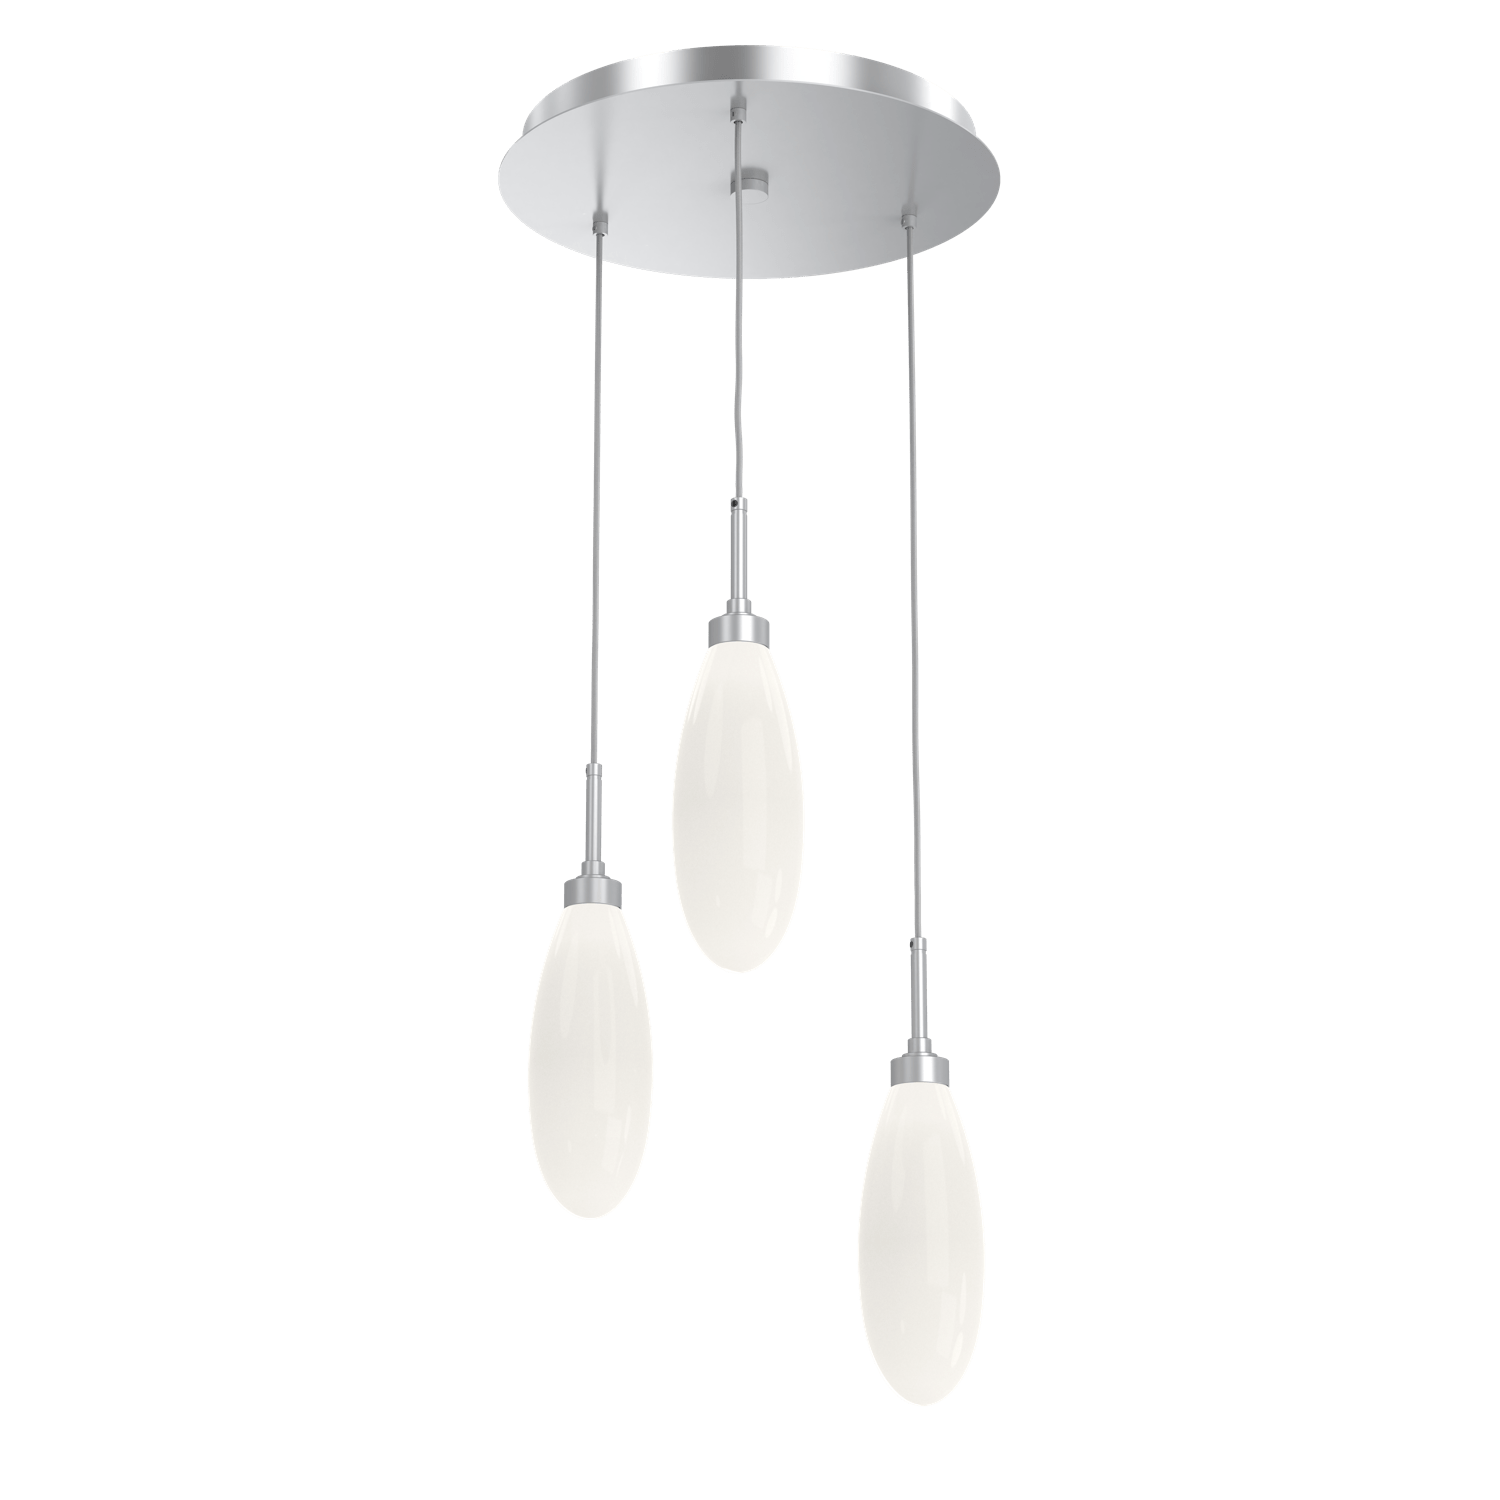 CHB0071-03-CS-WL-LL-Hammerton-Studio-Fiori-3-light-round-pendant-chandelier-with-classic-silver-finish-and-opal-white-glass-shades-and-LED-lamping